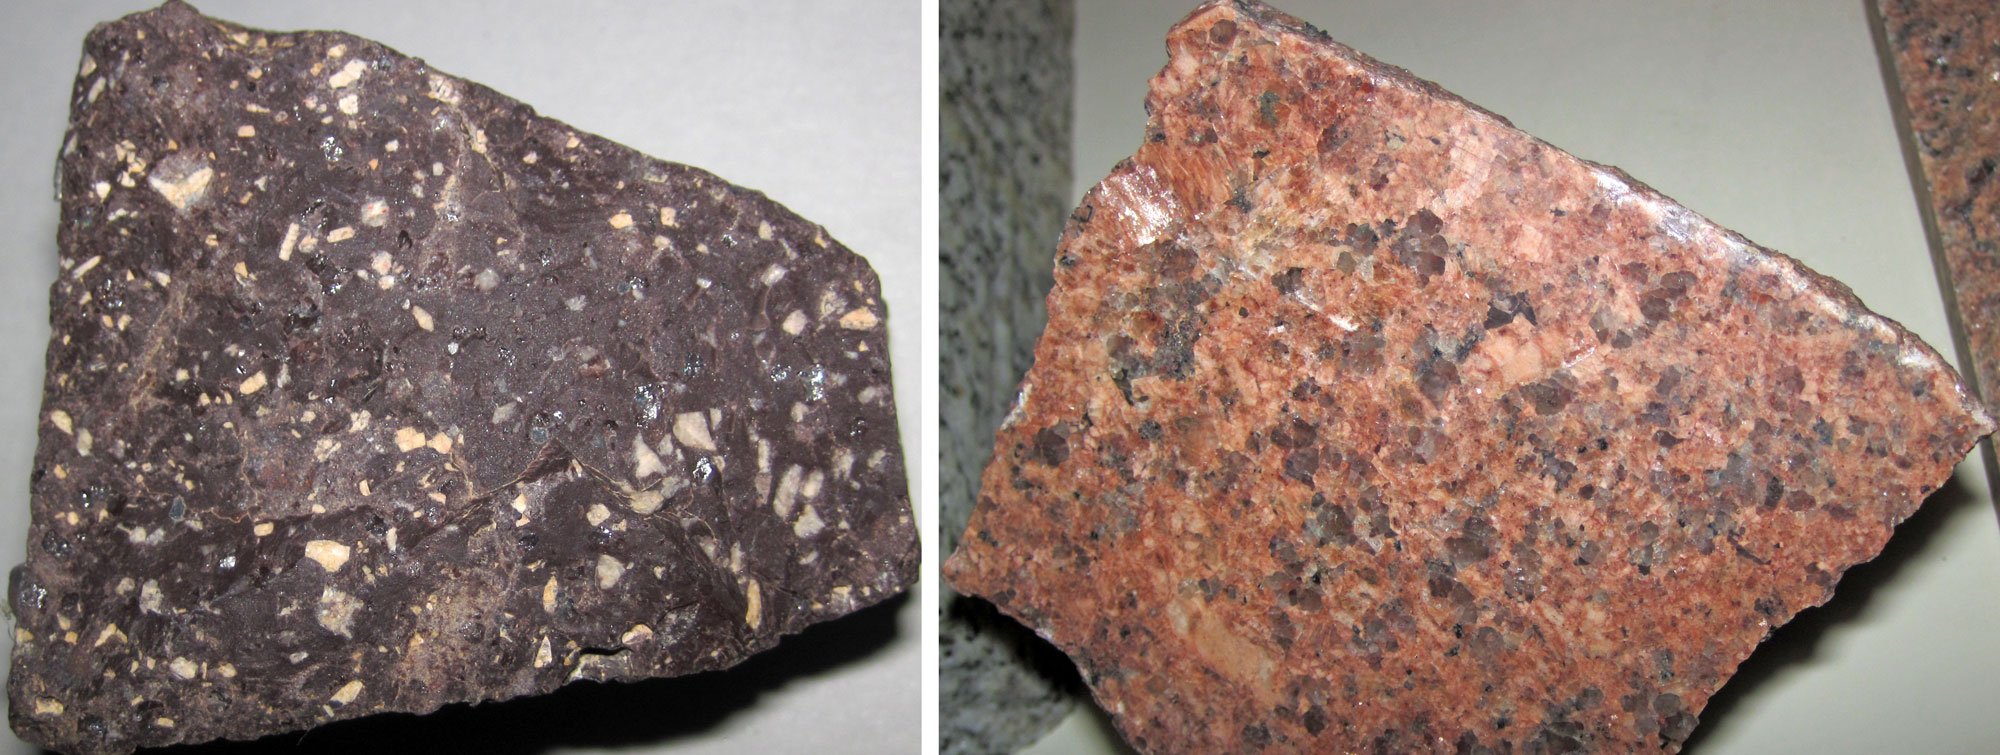 2-Panel figure showing photos of Precambrian igneous rocks from the St. Francois Mountains in Missouri. Panel 1: A chunk of rhyolite, a dark-colored rock with lighter inclusions. Panel 2: A polished chunk of Missouri red granite. The stone is pinkish in color and is made up of large, easily visible crystals.